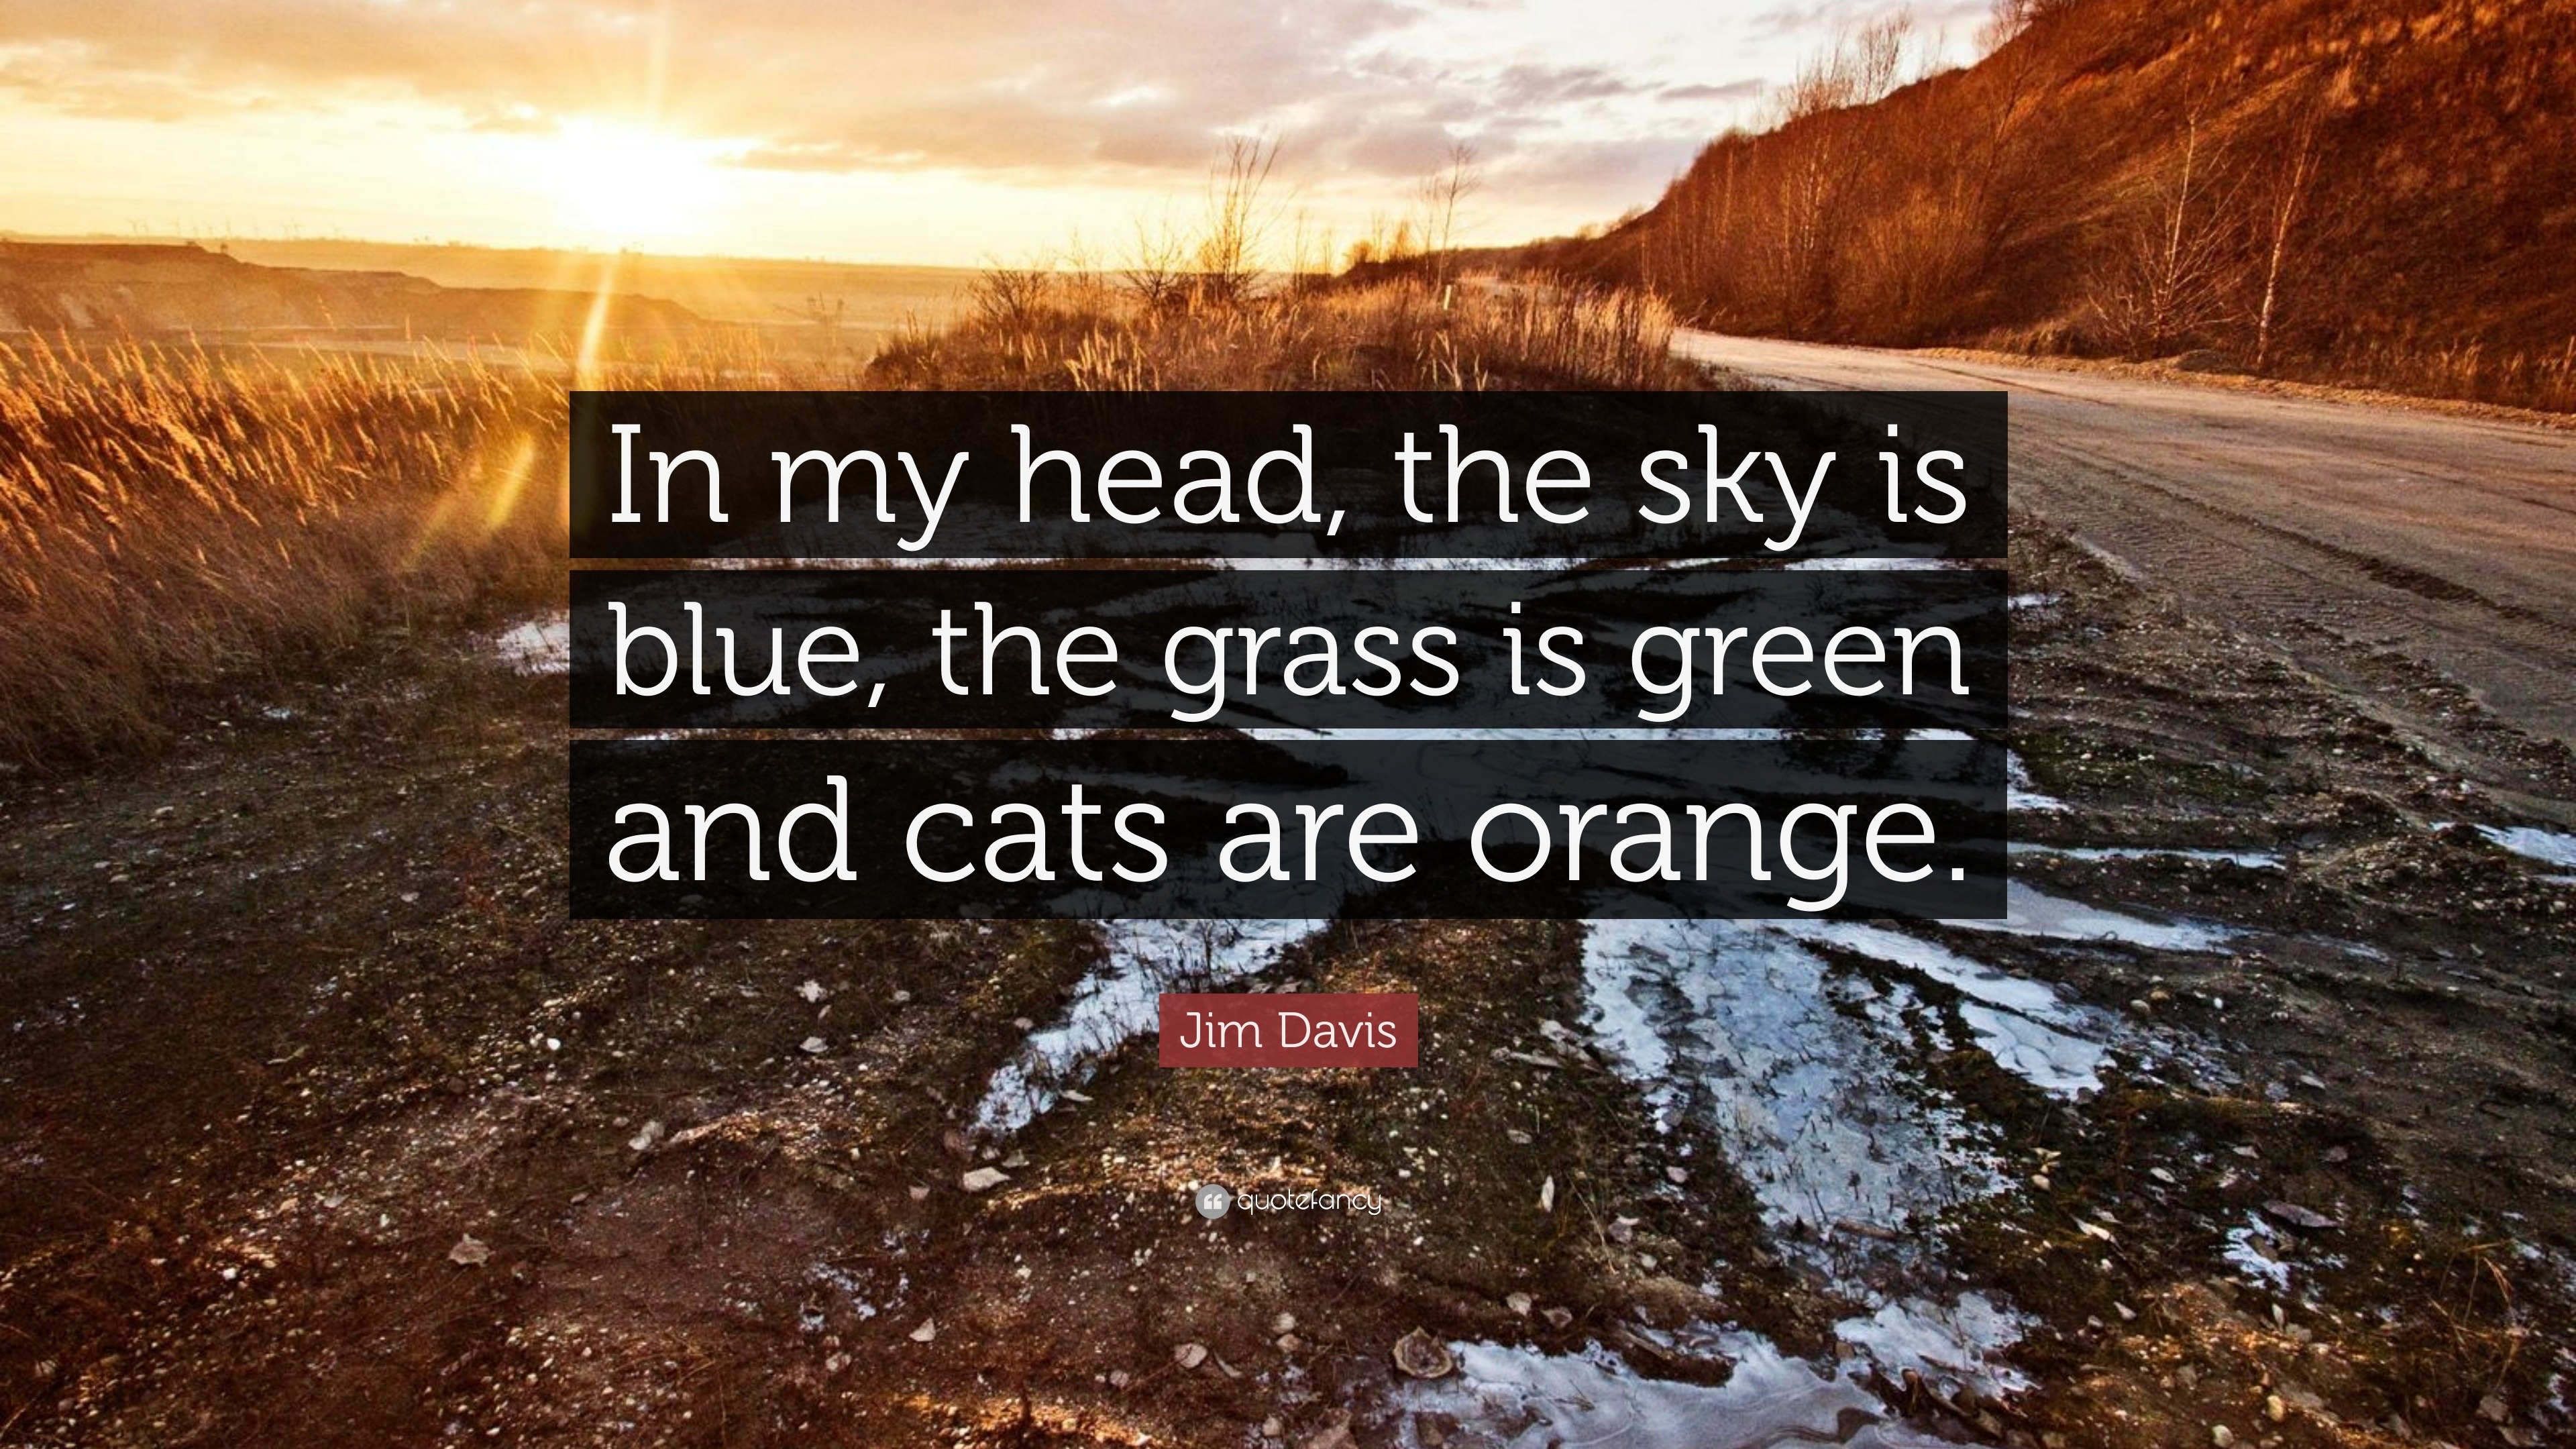 the sky is blue In my head the grass is green and cats are orange. Jim Davis